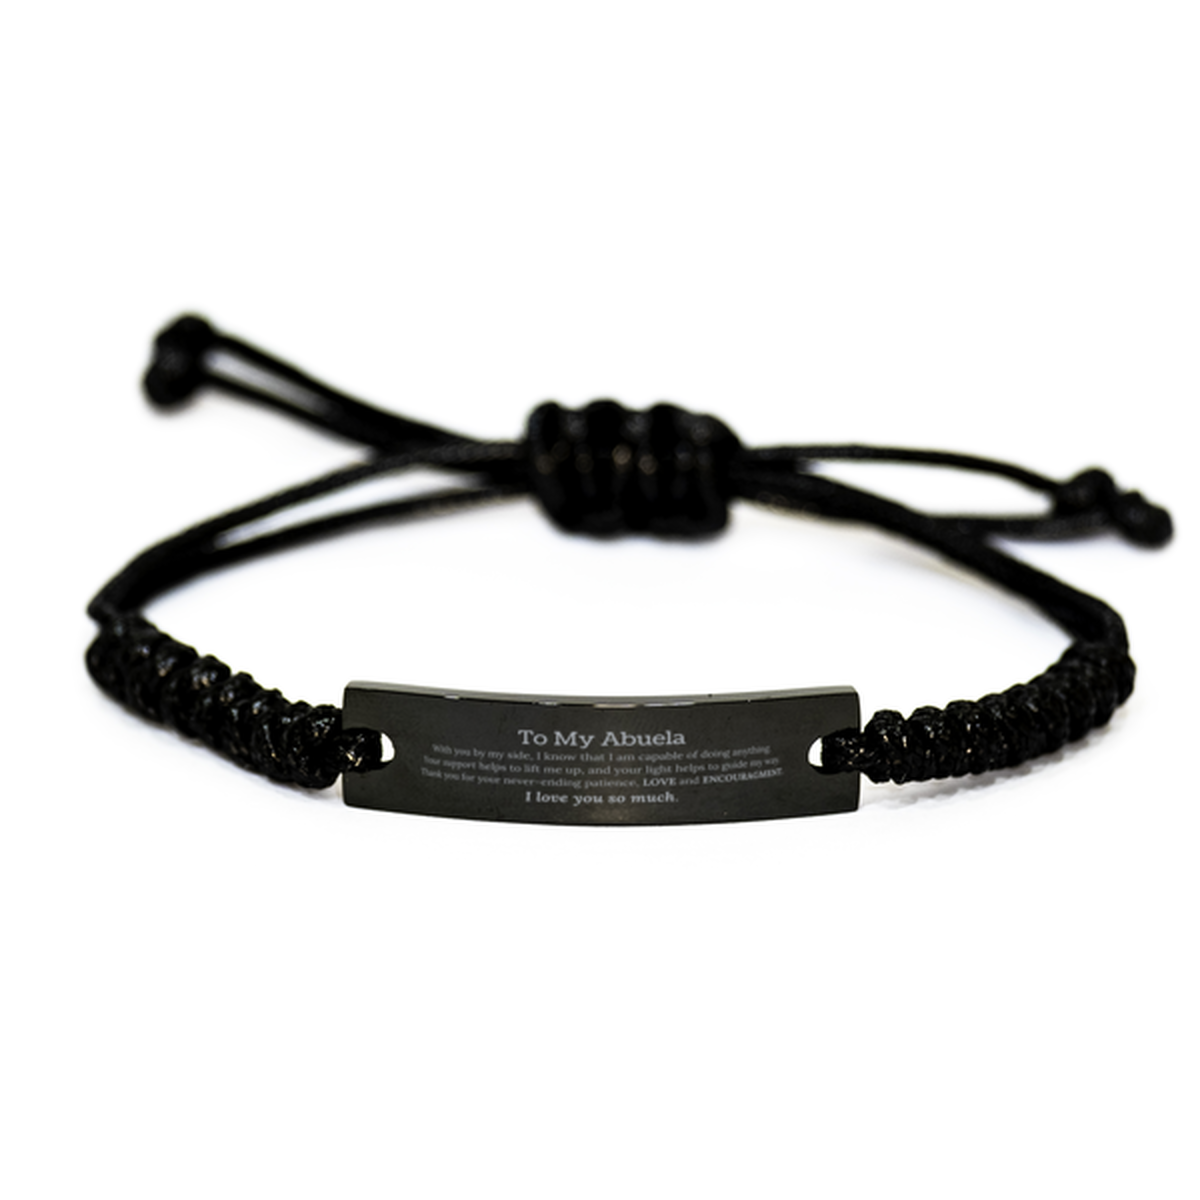 Appreciation Abuela Black Rope Bracelet Gifts, To My Abuela Birthday Christmas Wedding Keepsake Gifts for Abuela With you by my side, I know that I am capable of doing anything. I love you so much